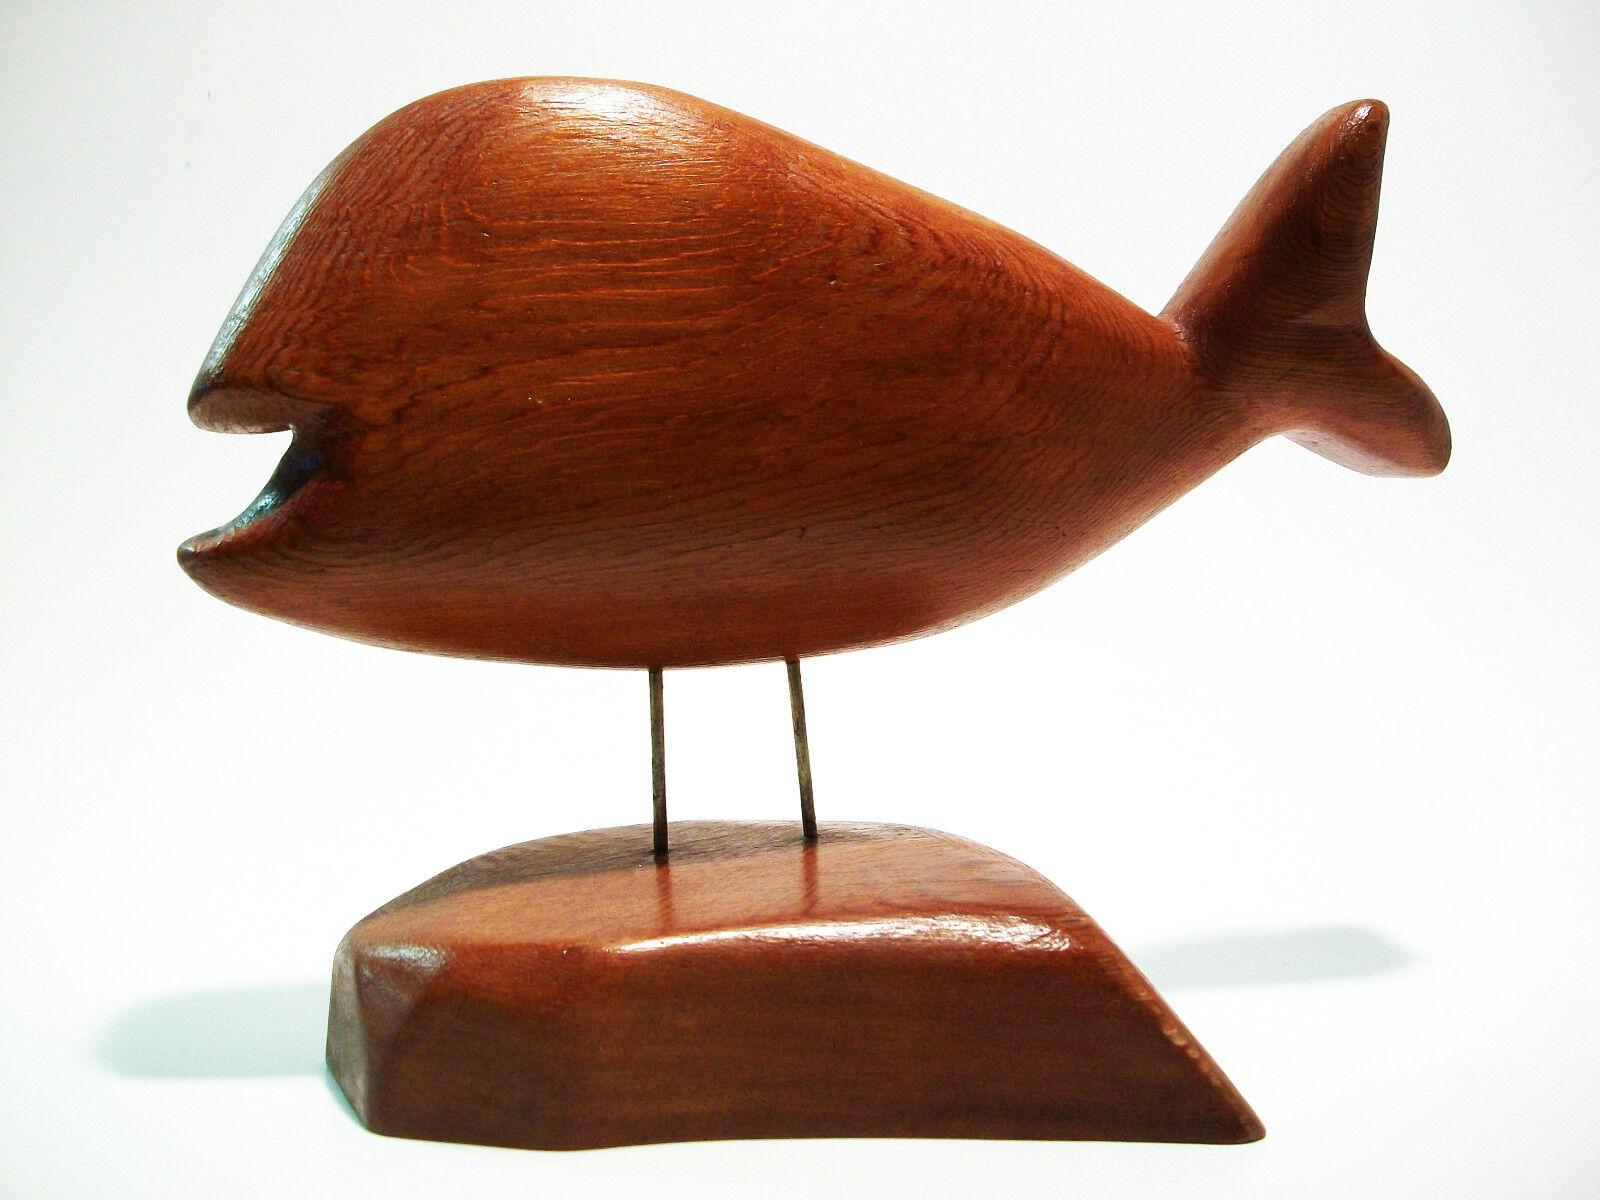 Canadian MIKE MATAS - Vintage Folk Art Whale Carving on Stand - Signed - Canada - C. 1980 For Sale